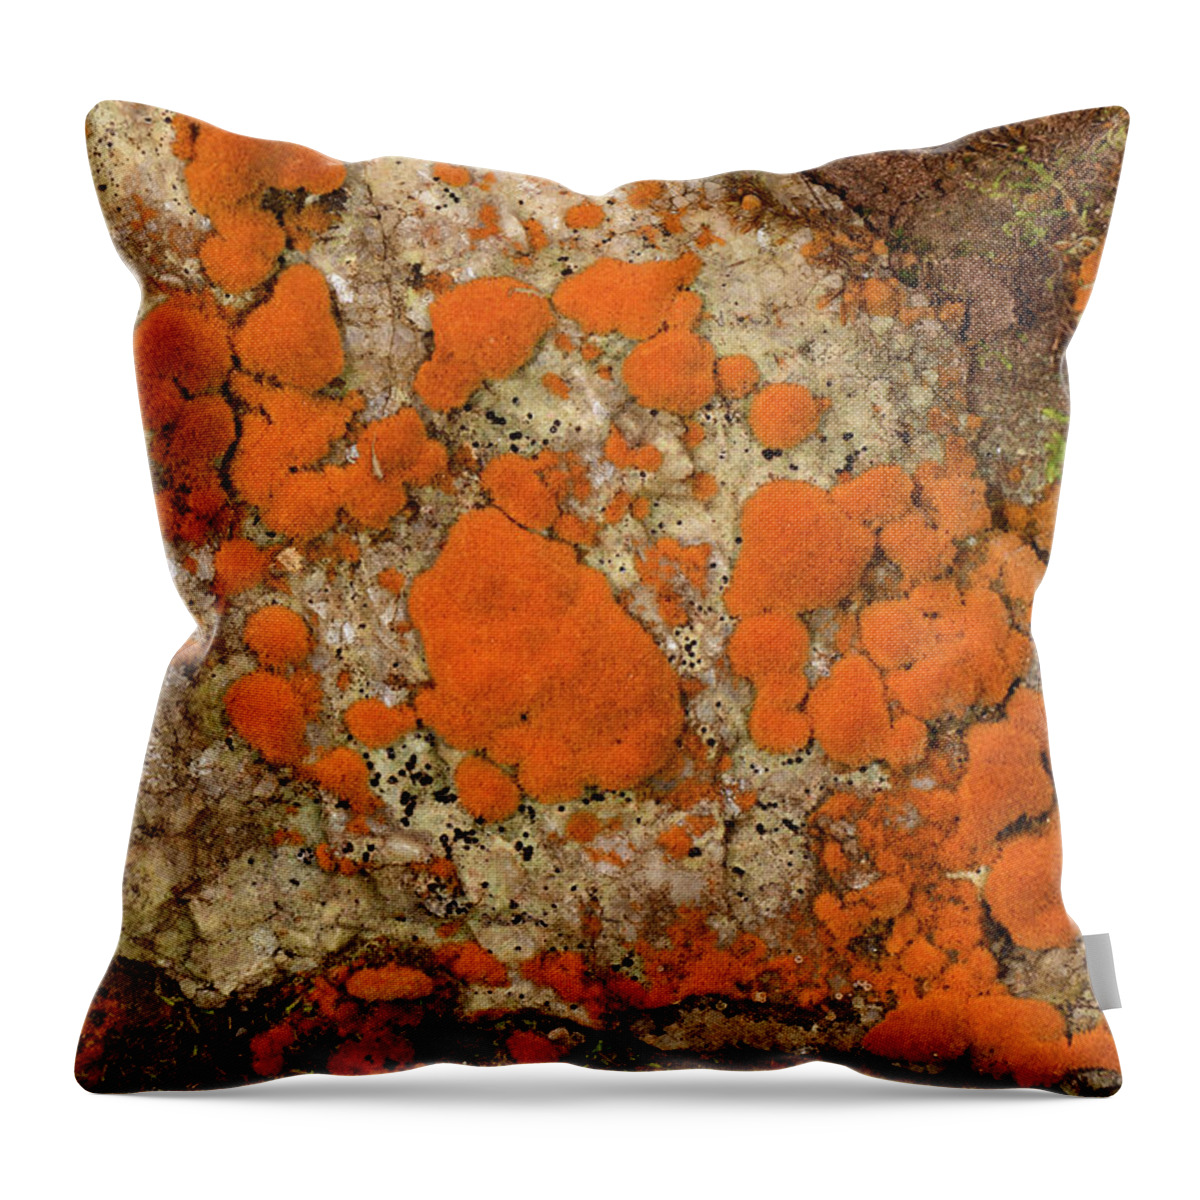 Plant Throw Pillow featuring the photograph Orange Alga On Damp Rocks, Brecon Beacons National Park by Will Watson / Naturepl.com